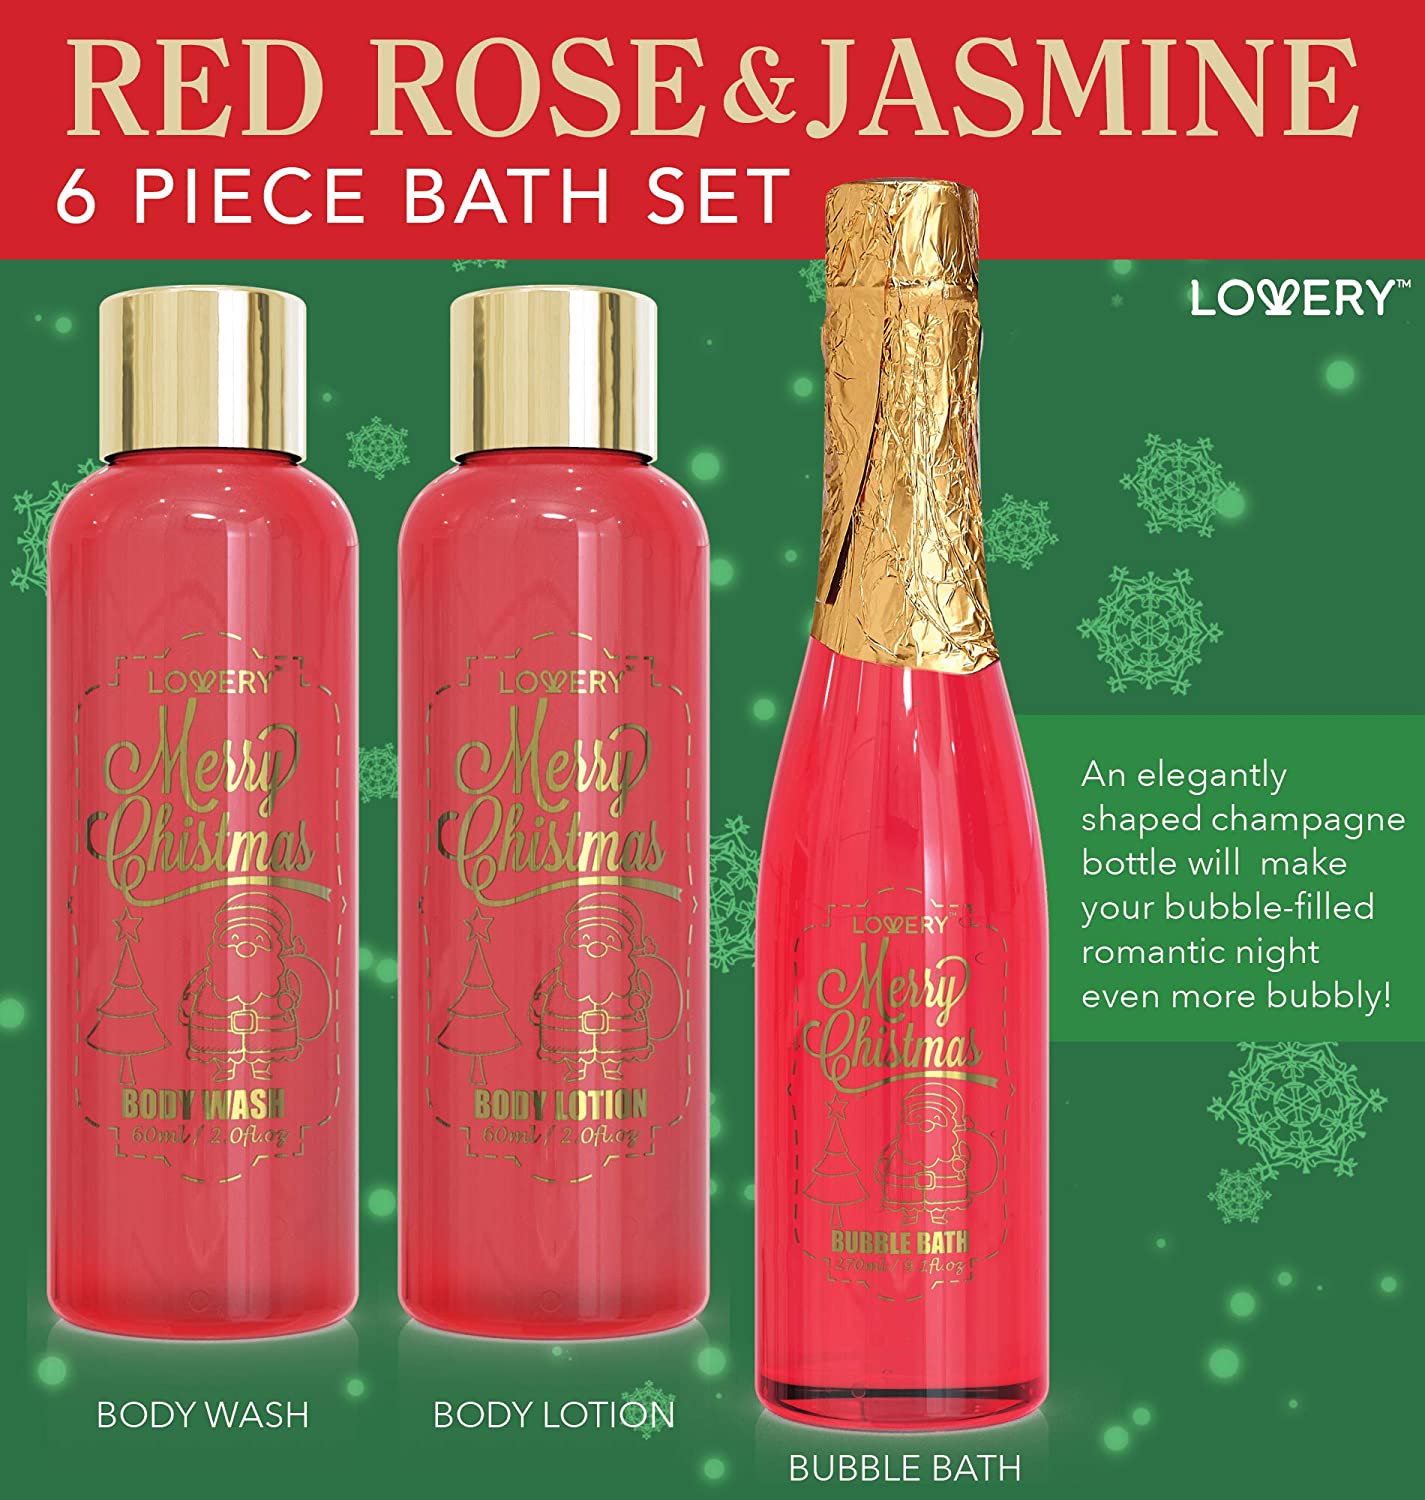 lovery body care set, body care set, Red Rose and Jasmine Christmas Gift, Red Rose and Jasmine, Holiday Stress Relief Gift Set, Calming Facial Spa at Home, Therapeutic Hot and Cold Compress, Reusable Christmas Eye Mask, Jasmine & Red Rose Bath Indulgence, Soothing Fragrance for Relaxation, Pure Ingredients for Skin Care, Shea Butter Moisturizing Bliss, Age-Reversing Antioxidant Spa, Cruelty-Free Luxury Bath Products